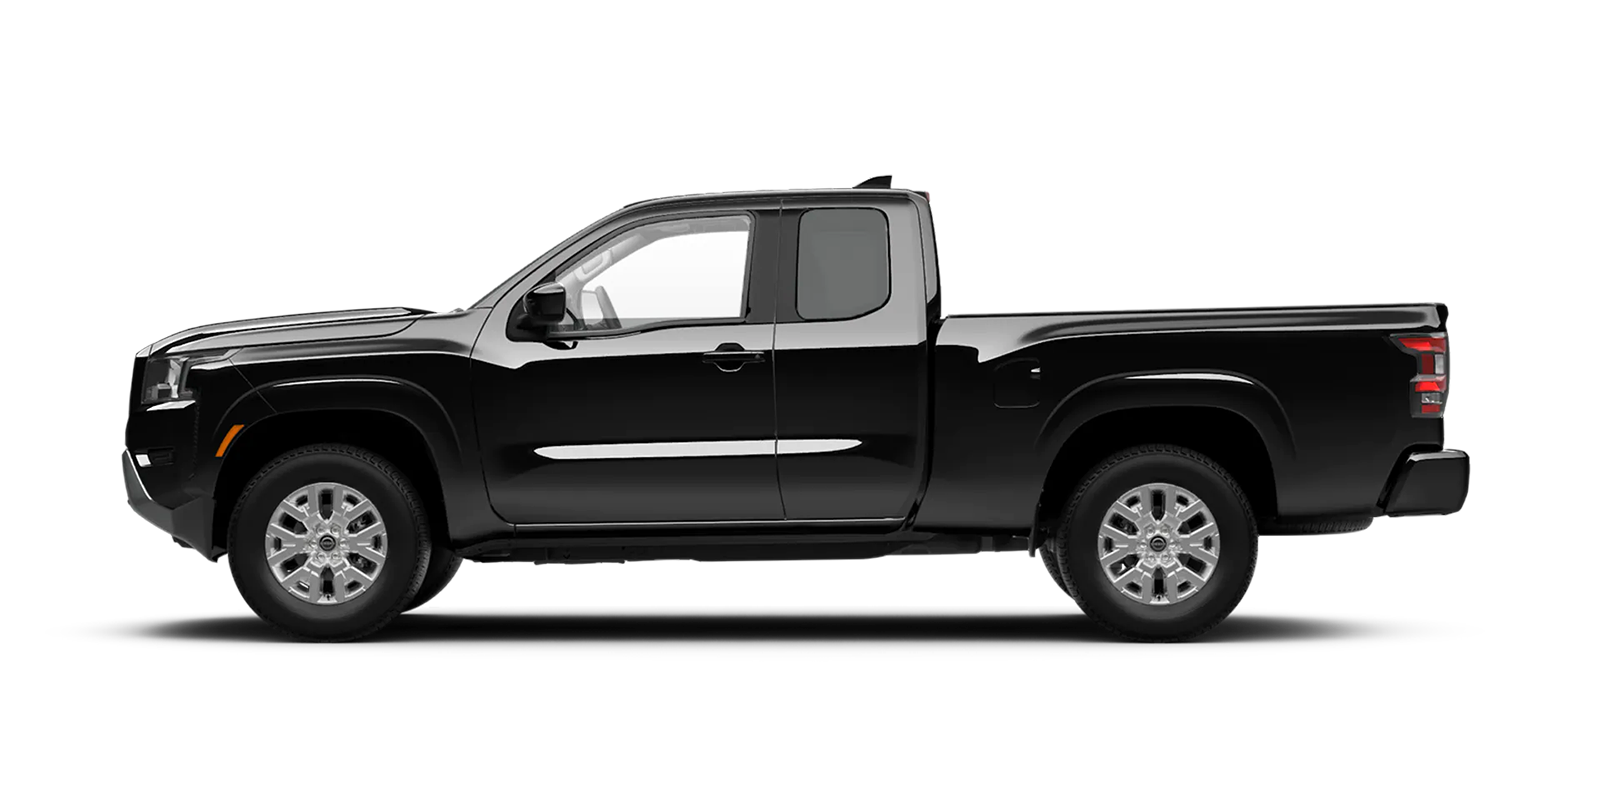 2022 Frontier King Cab SV 4x2 in Super Black | Fort Collins Nissan in Fort Collins CO